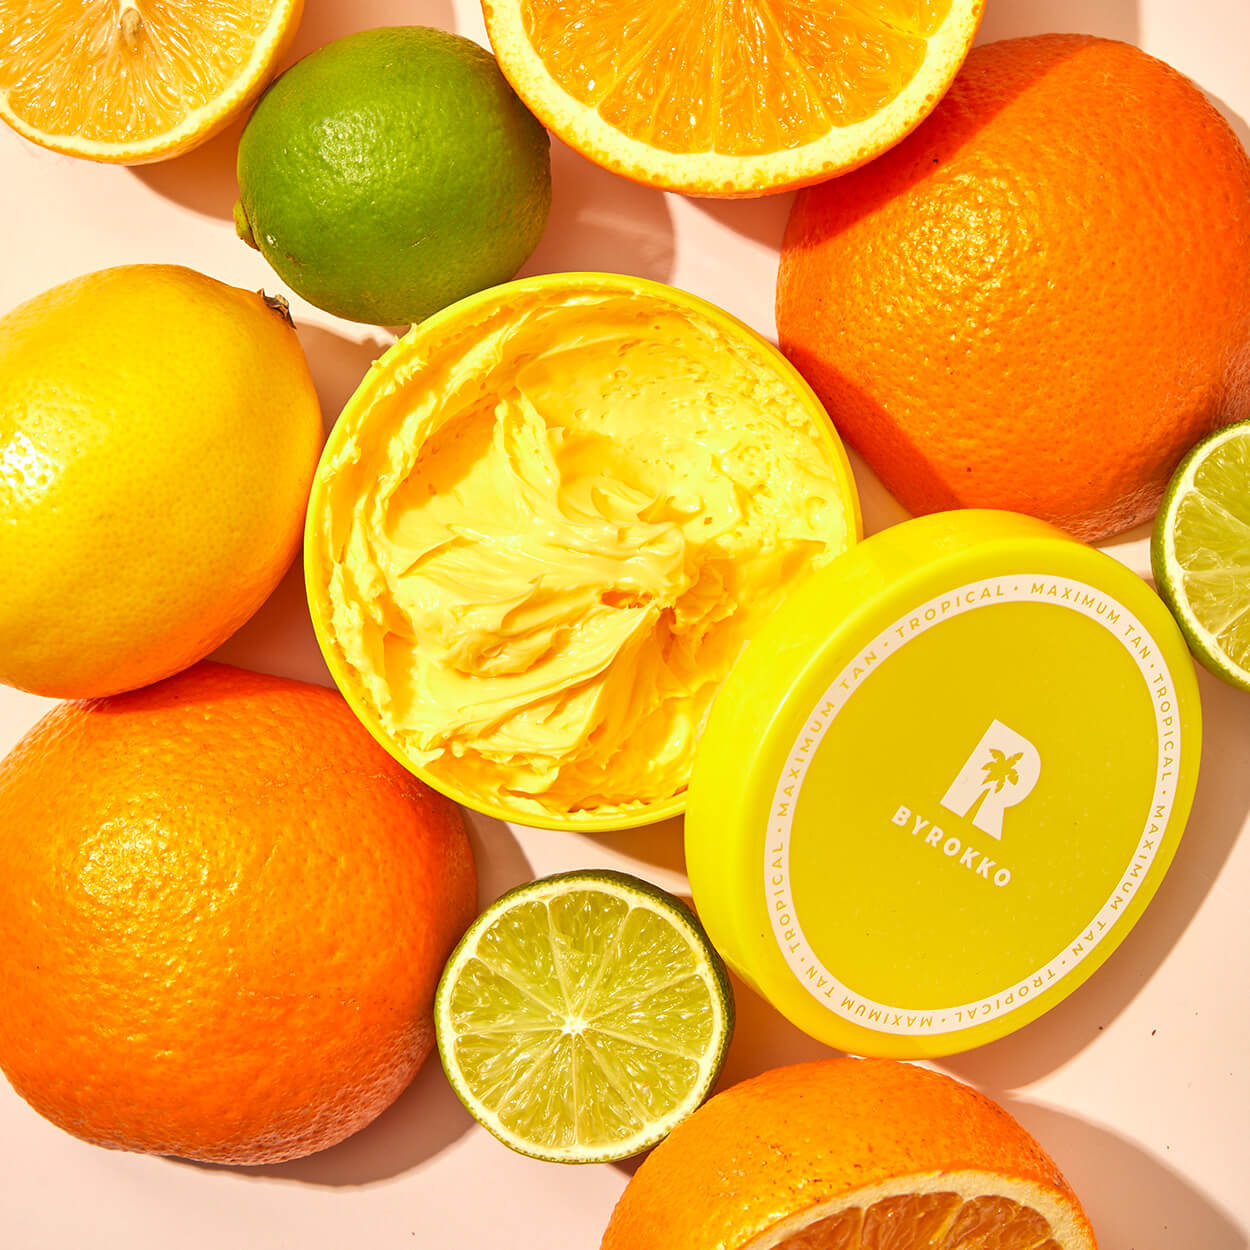 An open package of Byrokko Shine Brown Tropical tanning cream beside oranges, limes, and lemons.